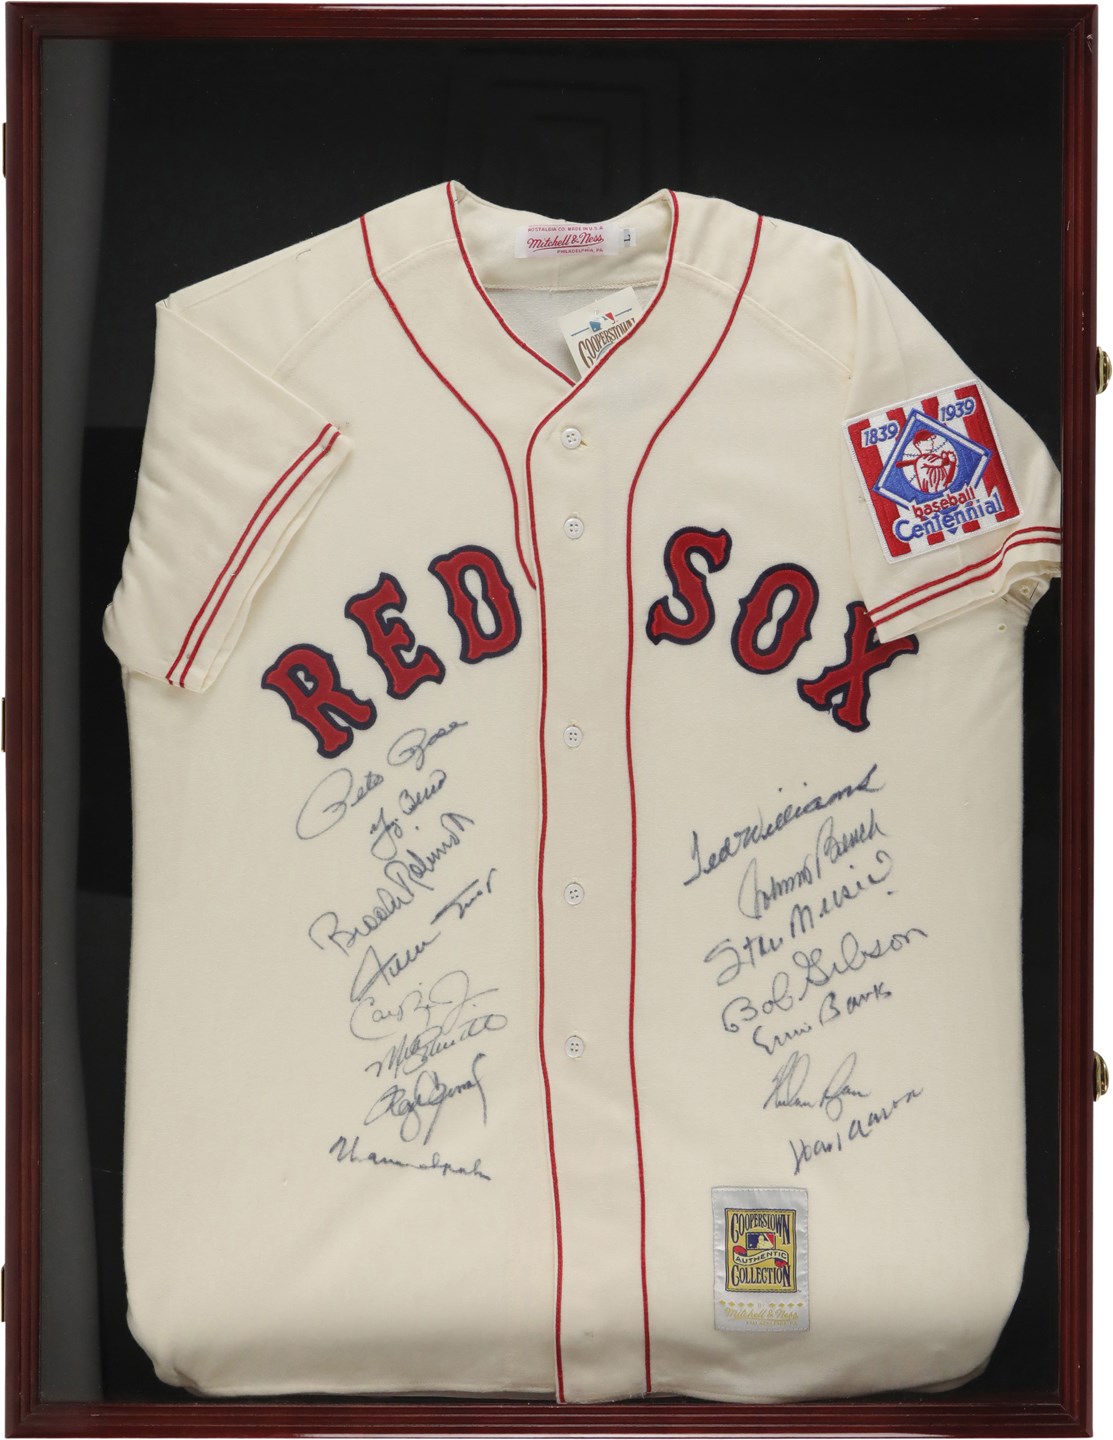 Baseball Autographs - Baseball All-Century Team Signed Commemorative Jersey - 15 Signatures Including Williams, Aaron, and Mays (PSA)